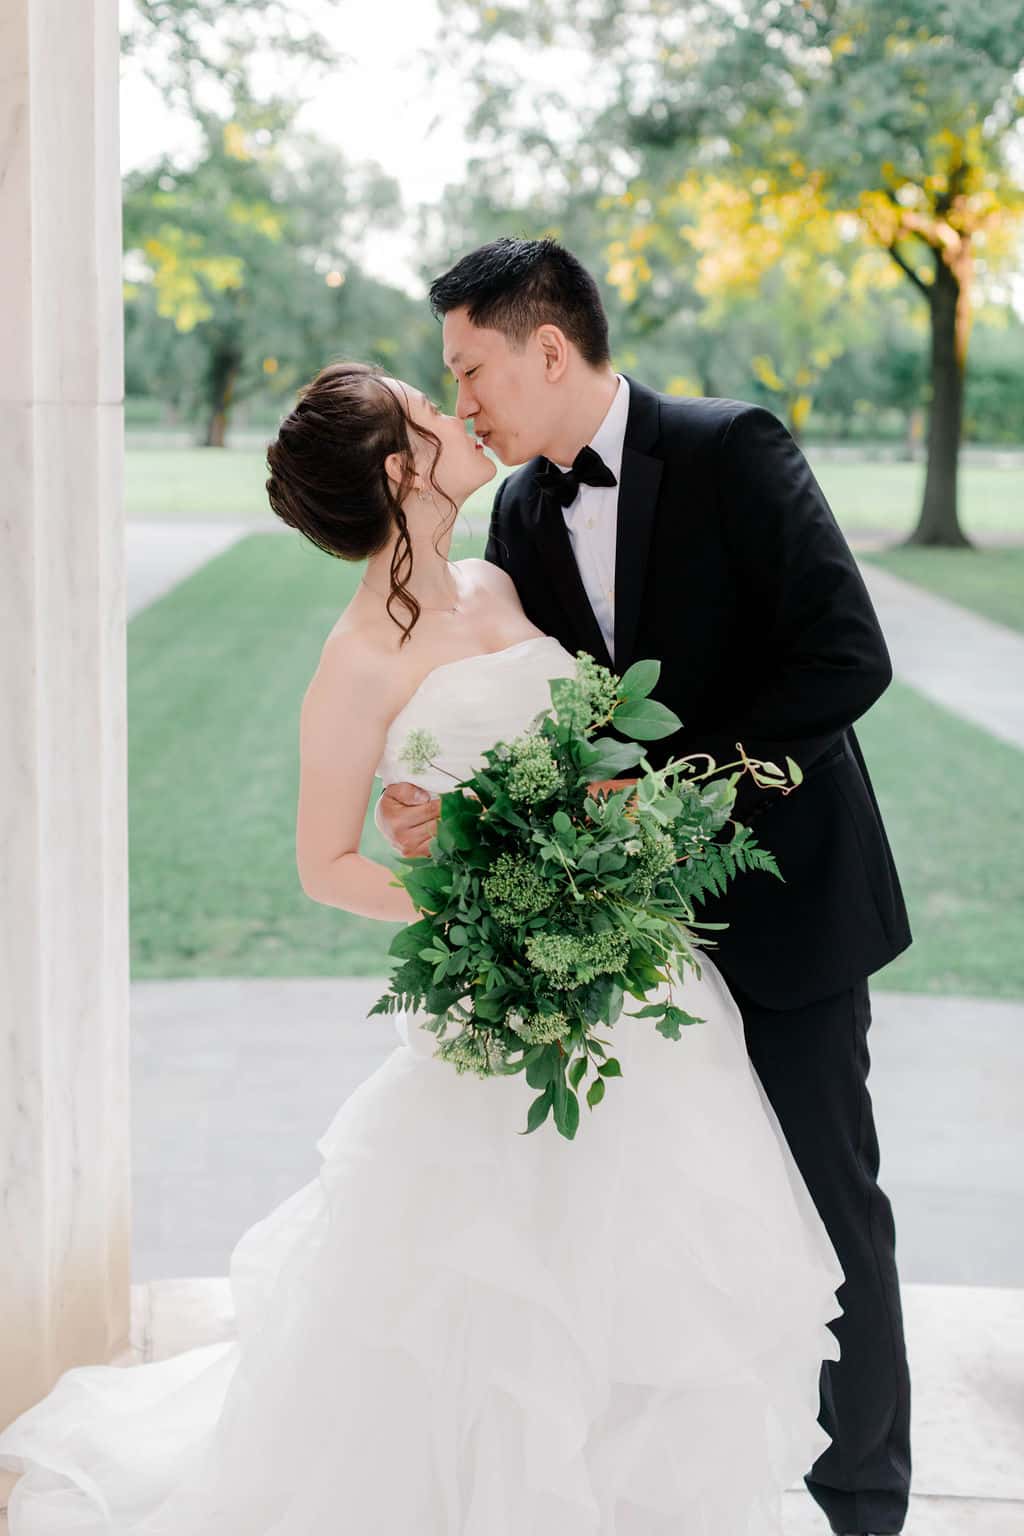 Wedding Inspiration: Harry Potter Styled Shoot  Capitol Romance ~  Practical & Local DC Area Weddings